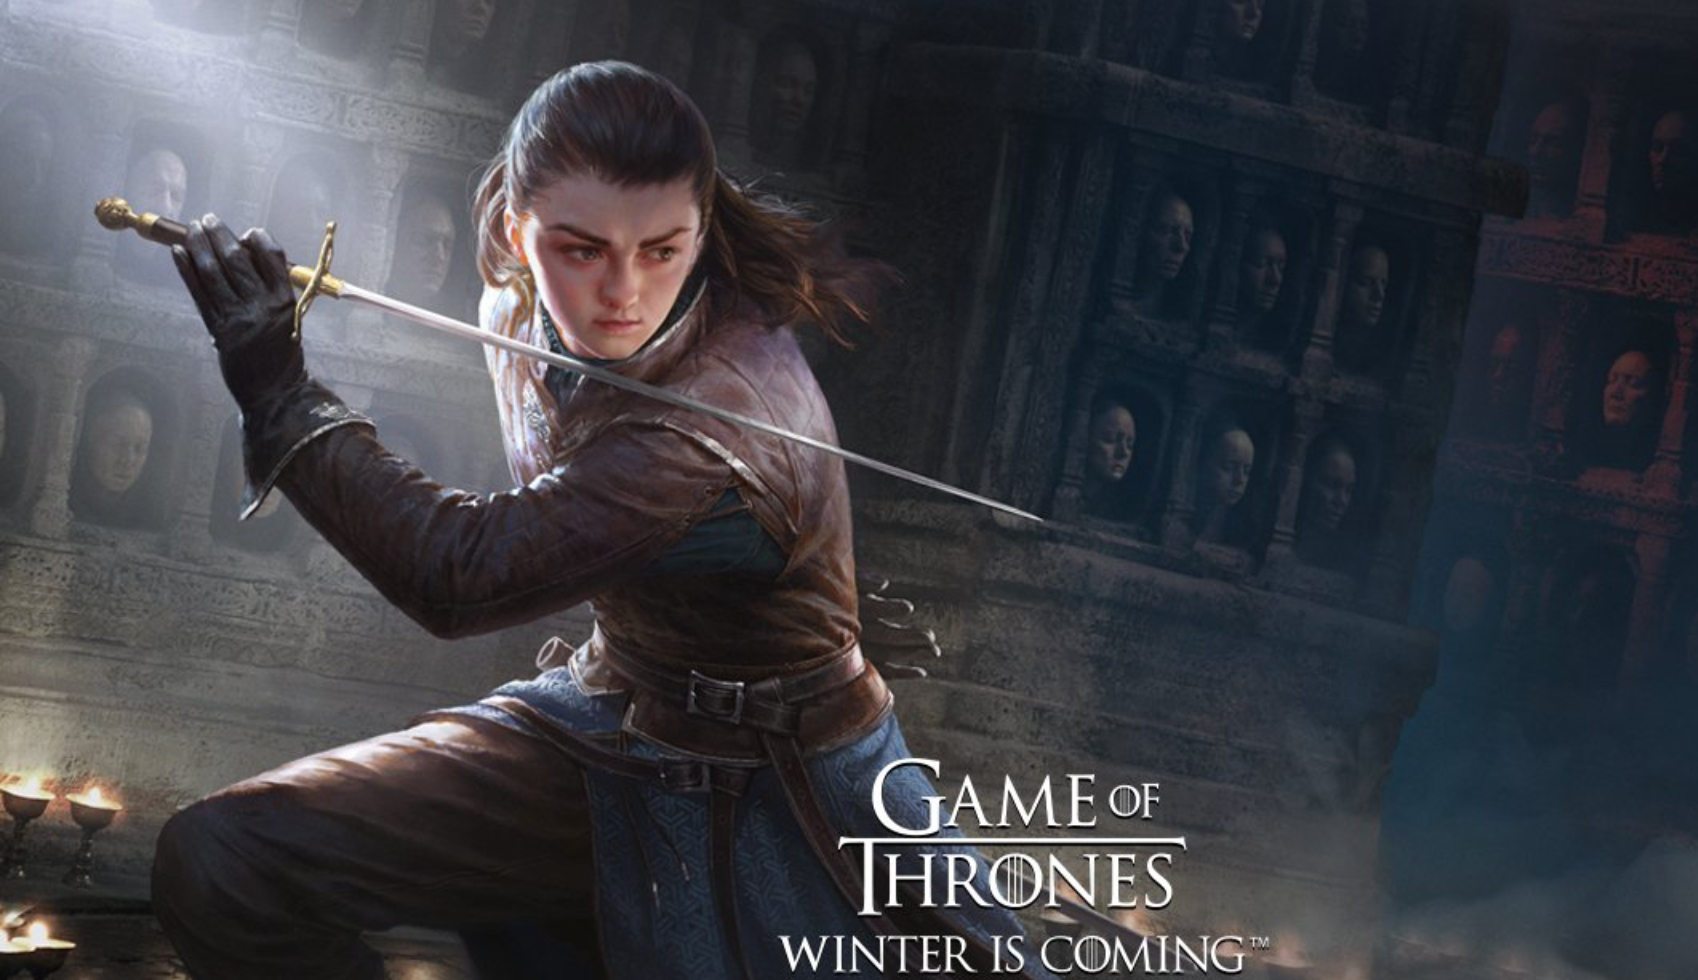 Tencent Releases Test Version of ‘Game of Thrones: Winter Is Coming’ on Smartphones in China Letting Players Attempt to Capture the Iron Throne